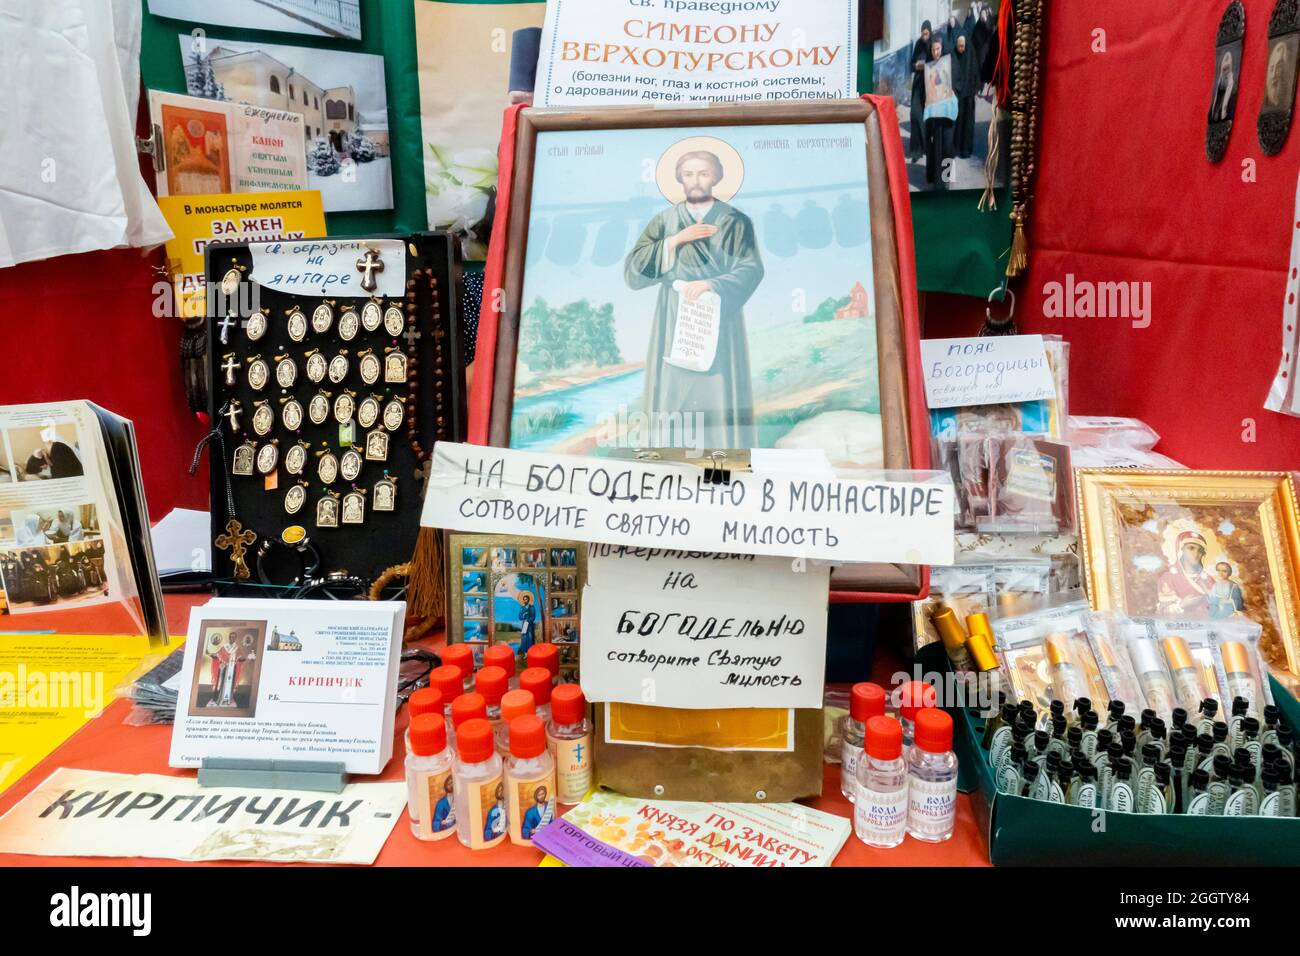 Stand selling religious paraphernalia and signs asking for donations at stand Orthodox fair, Moscow, Russia Stock Photo